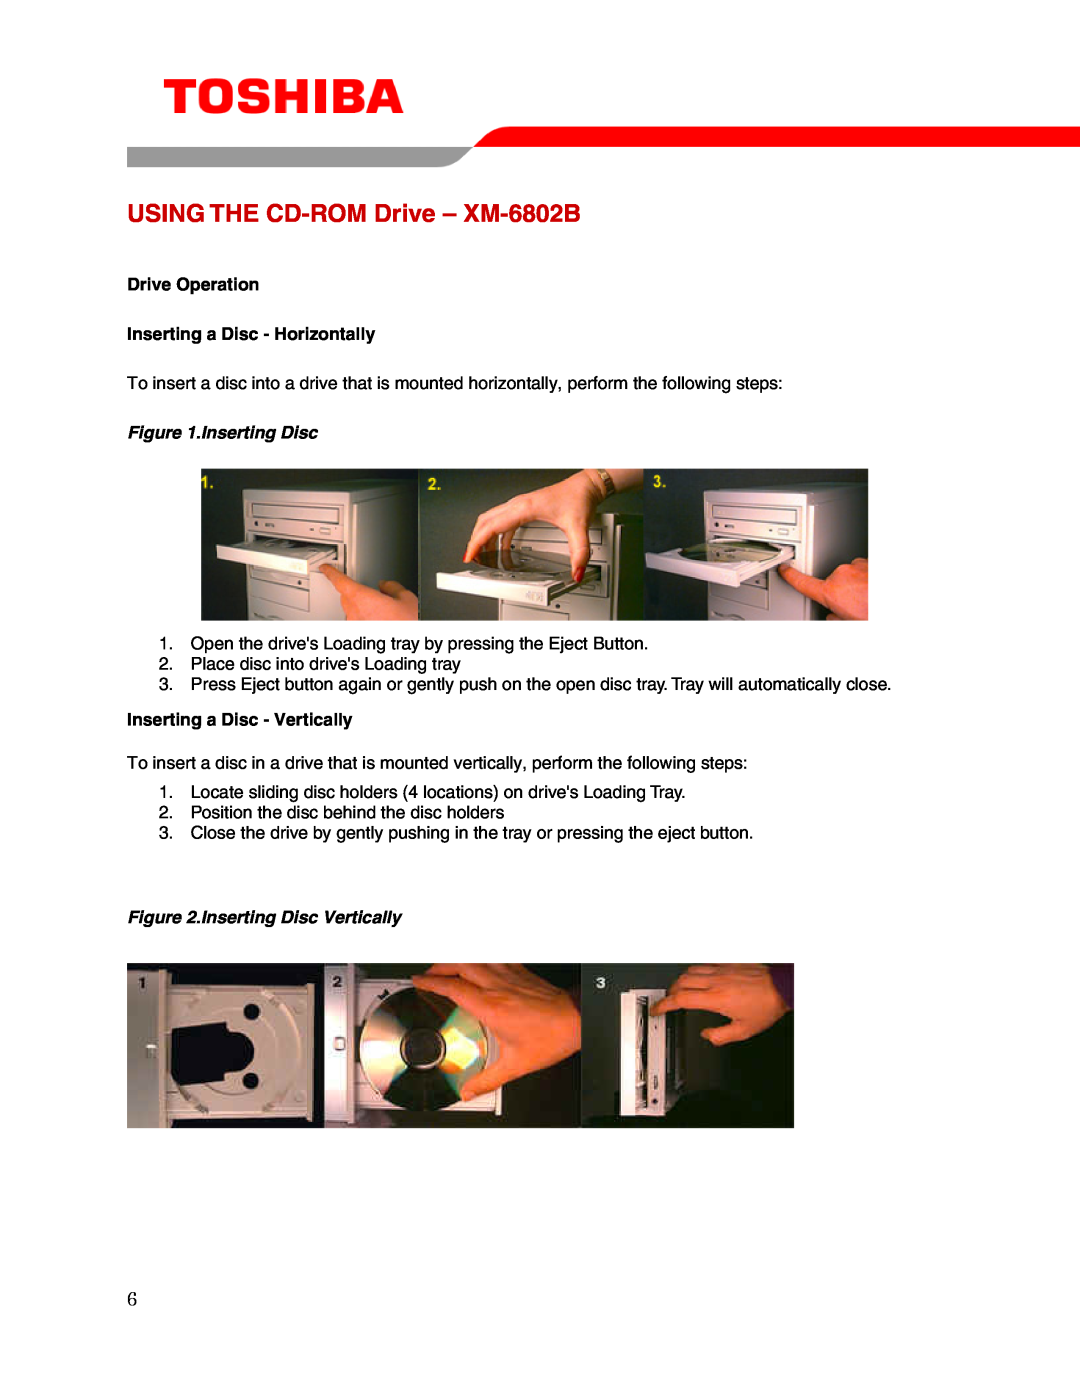 Toshiba user manual USING THE CD-ROM Drive - XM-6802B, Drive Operation Inserting a Disc - Horizontally, Inserting Disc 